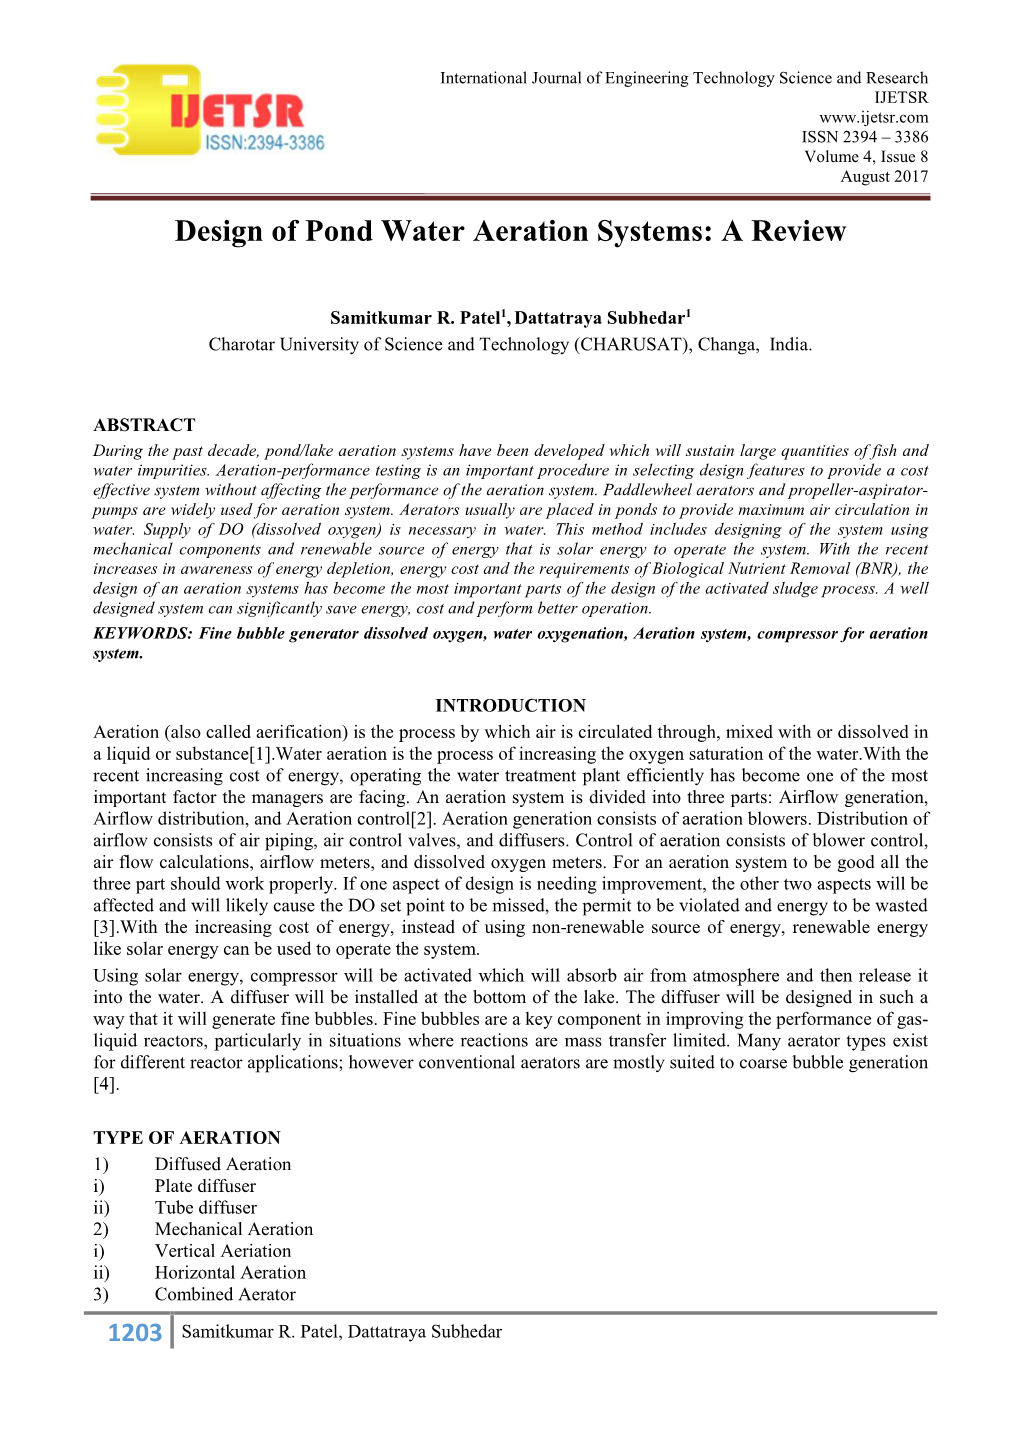 Design of Pond Water Aeration Systems: a Review